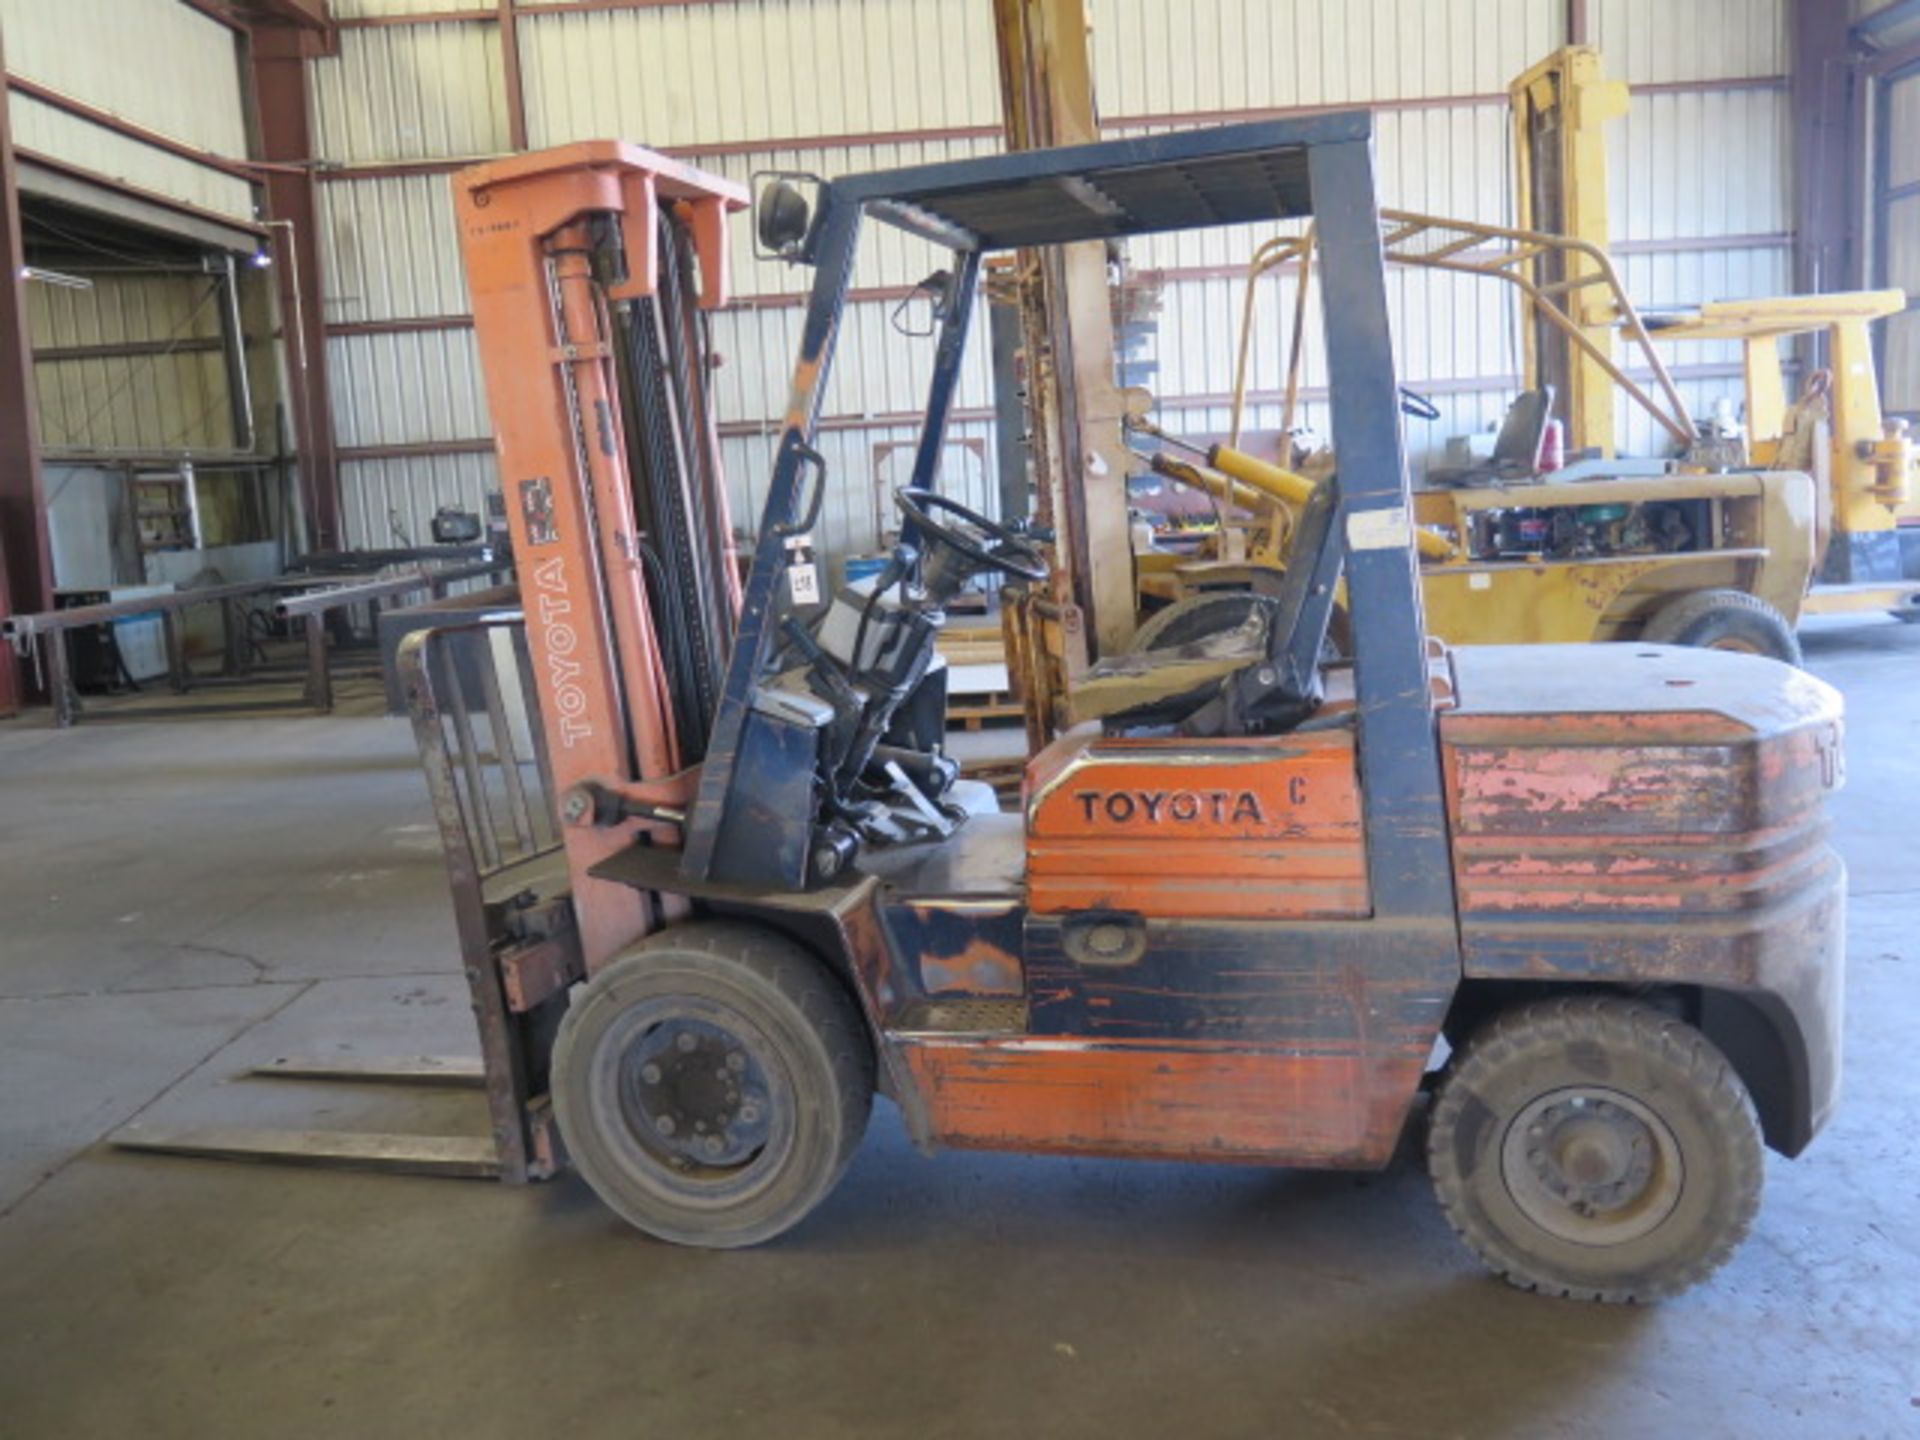 Toyota 02-5FG30 5800 Lb Cap Gas Powered Forklift s/n 70247 w/ 3-Stage,185” Lift height, SOLD AS IS